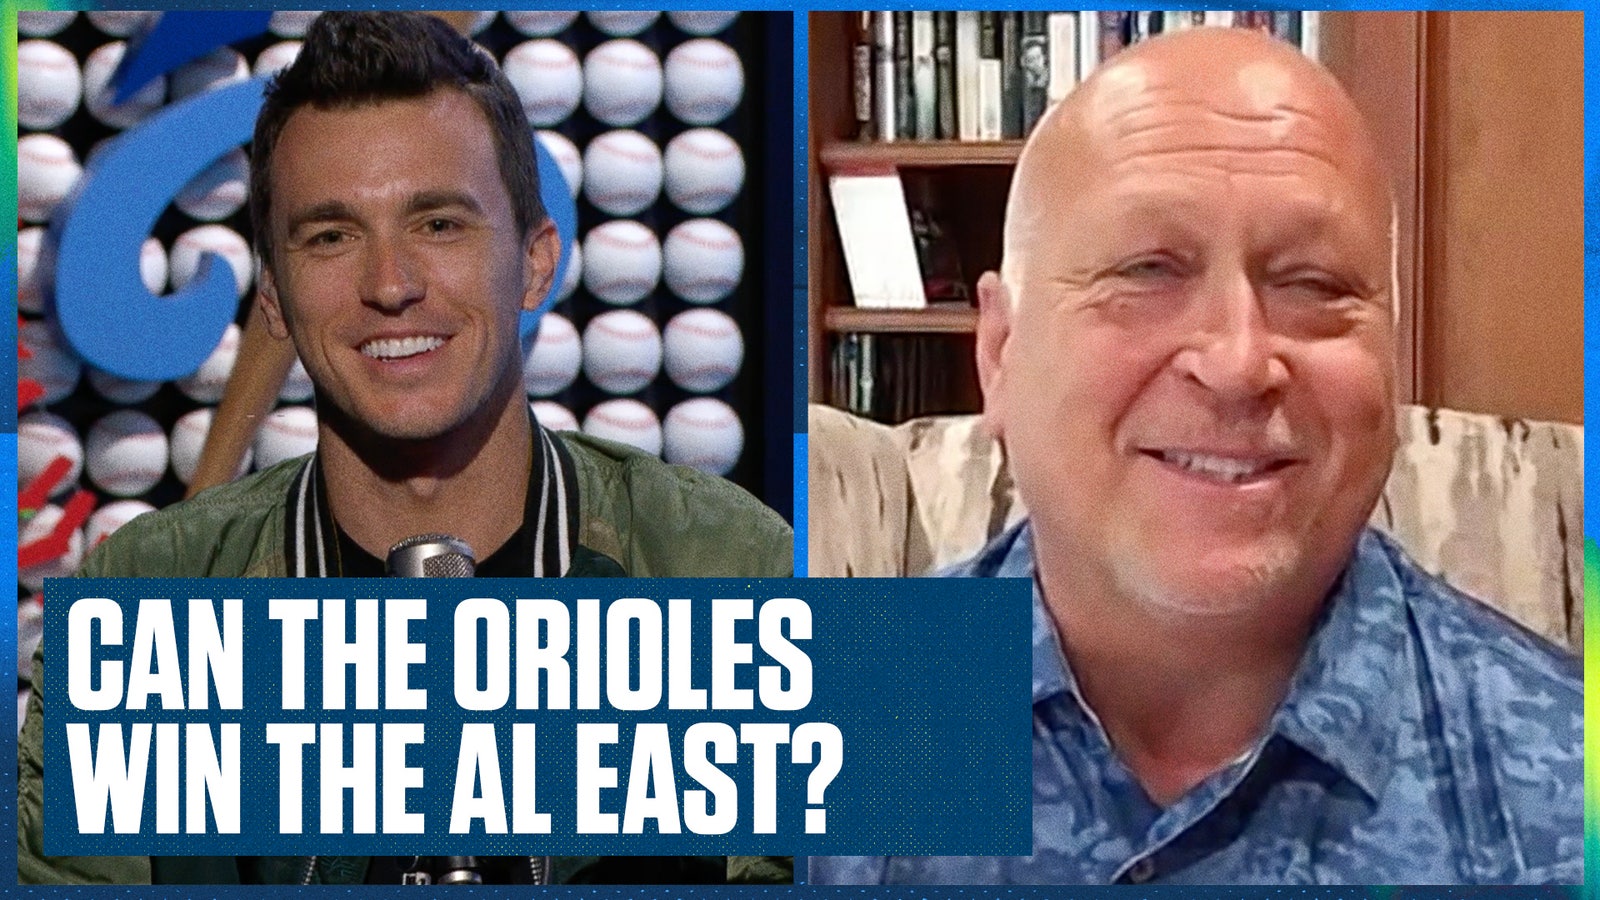 Cal Ripken Jr. on if the Baltimore Orioles can win the AL East division title